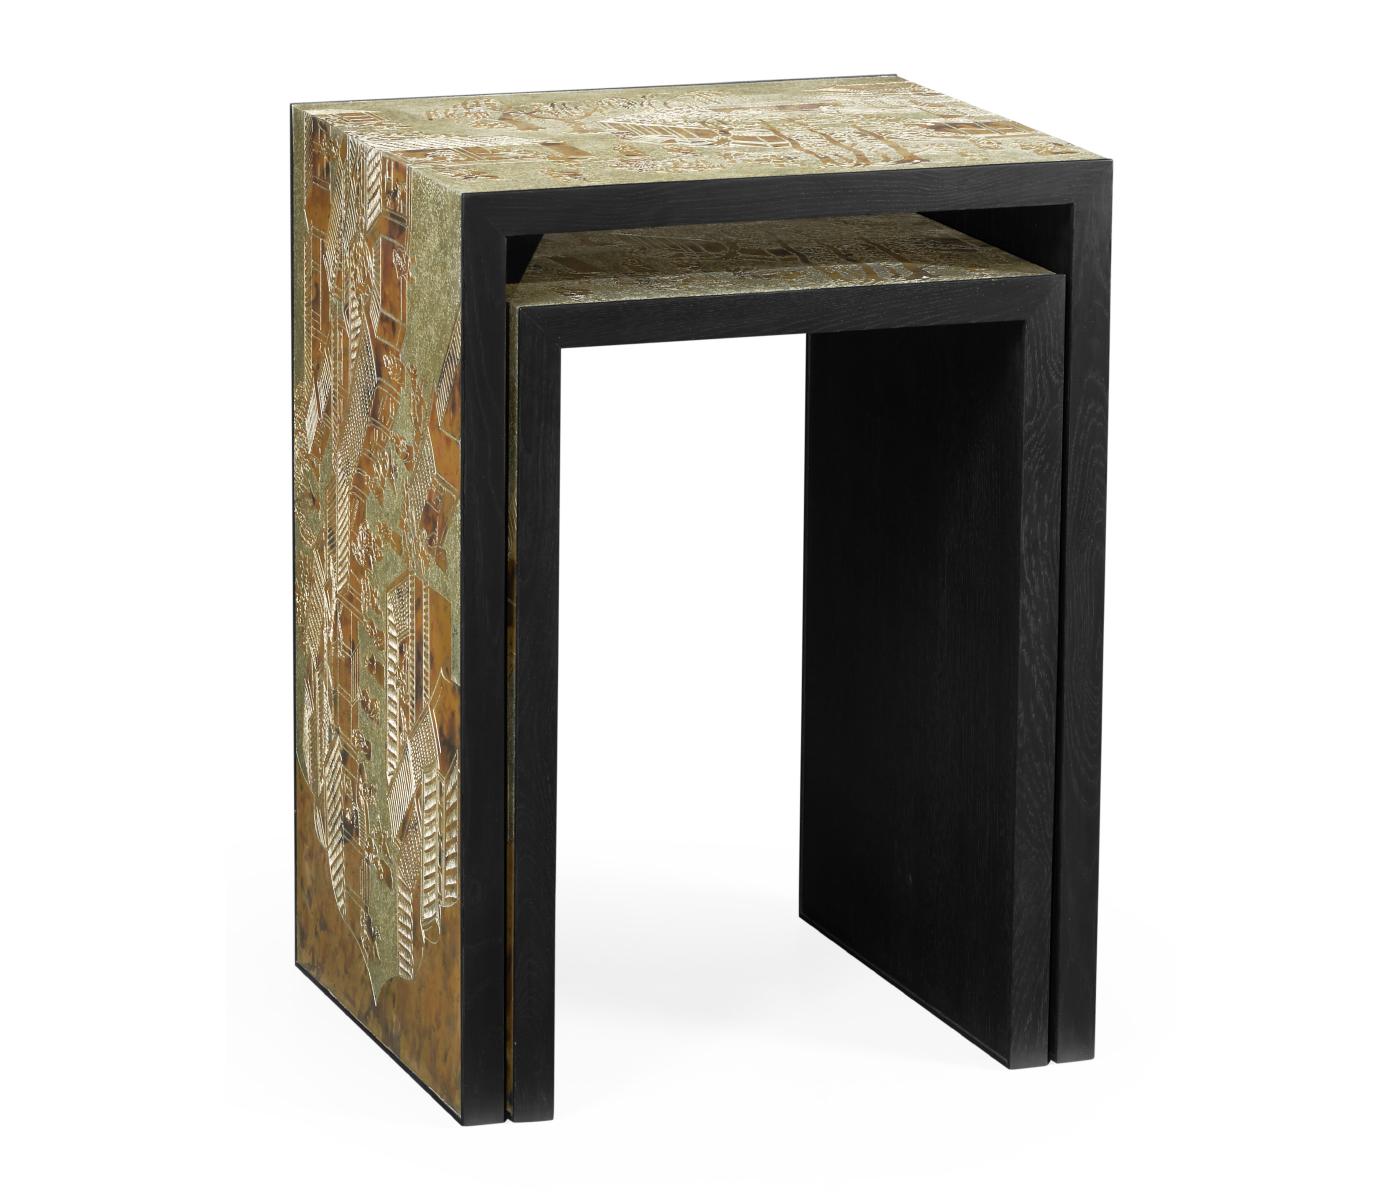 A midcentury style chinoiserie antiqued etched brass and ebonized oak nesting tables.
Inspired by the fantastic works of art of Philip and Kelvin LaVerne.

Dimensions: 16.25